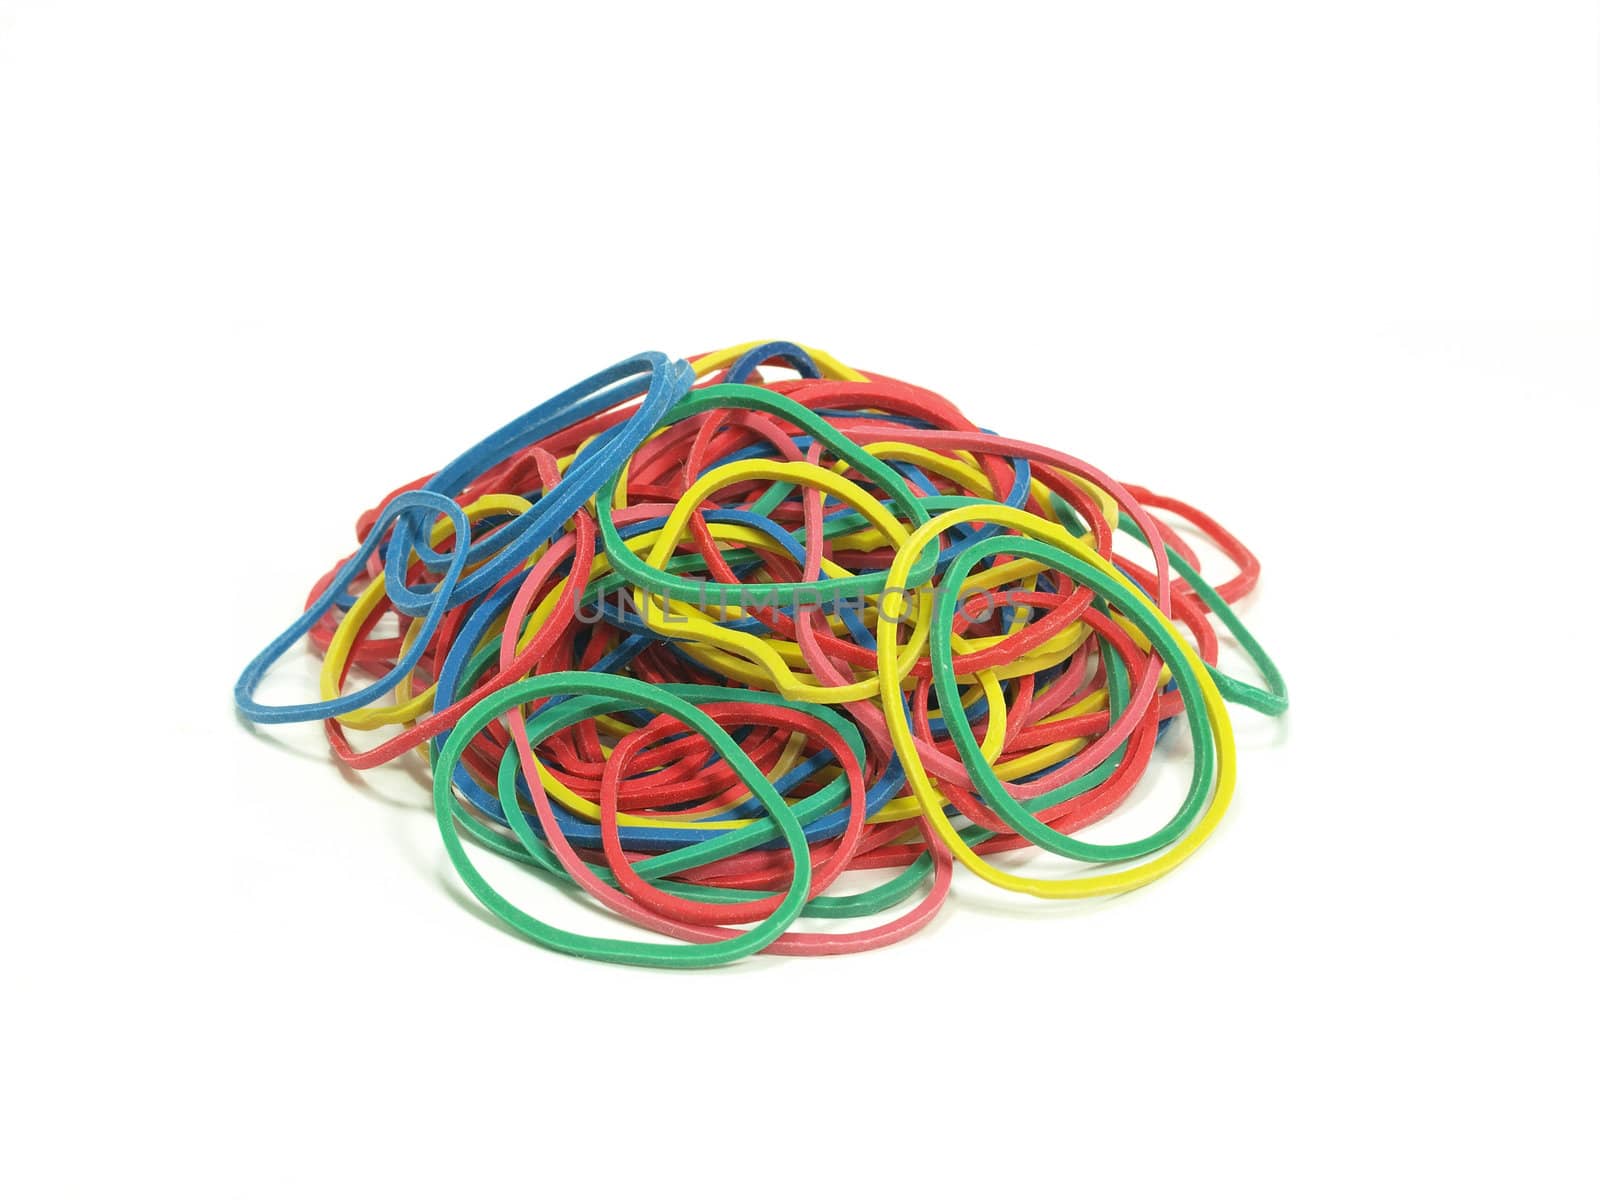 pile of colorful rubber bands on white background